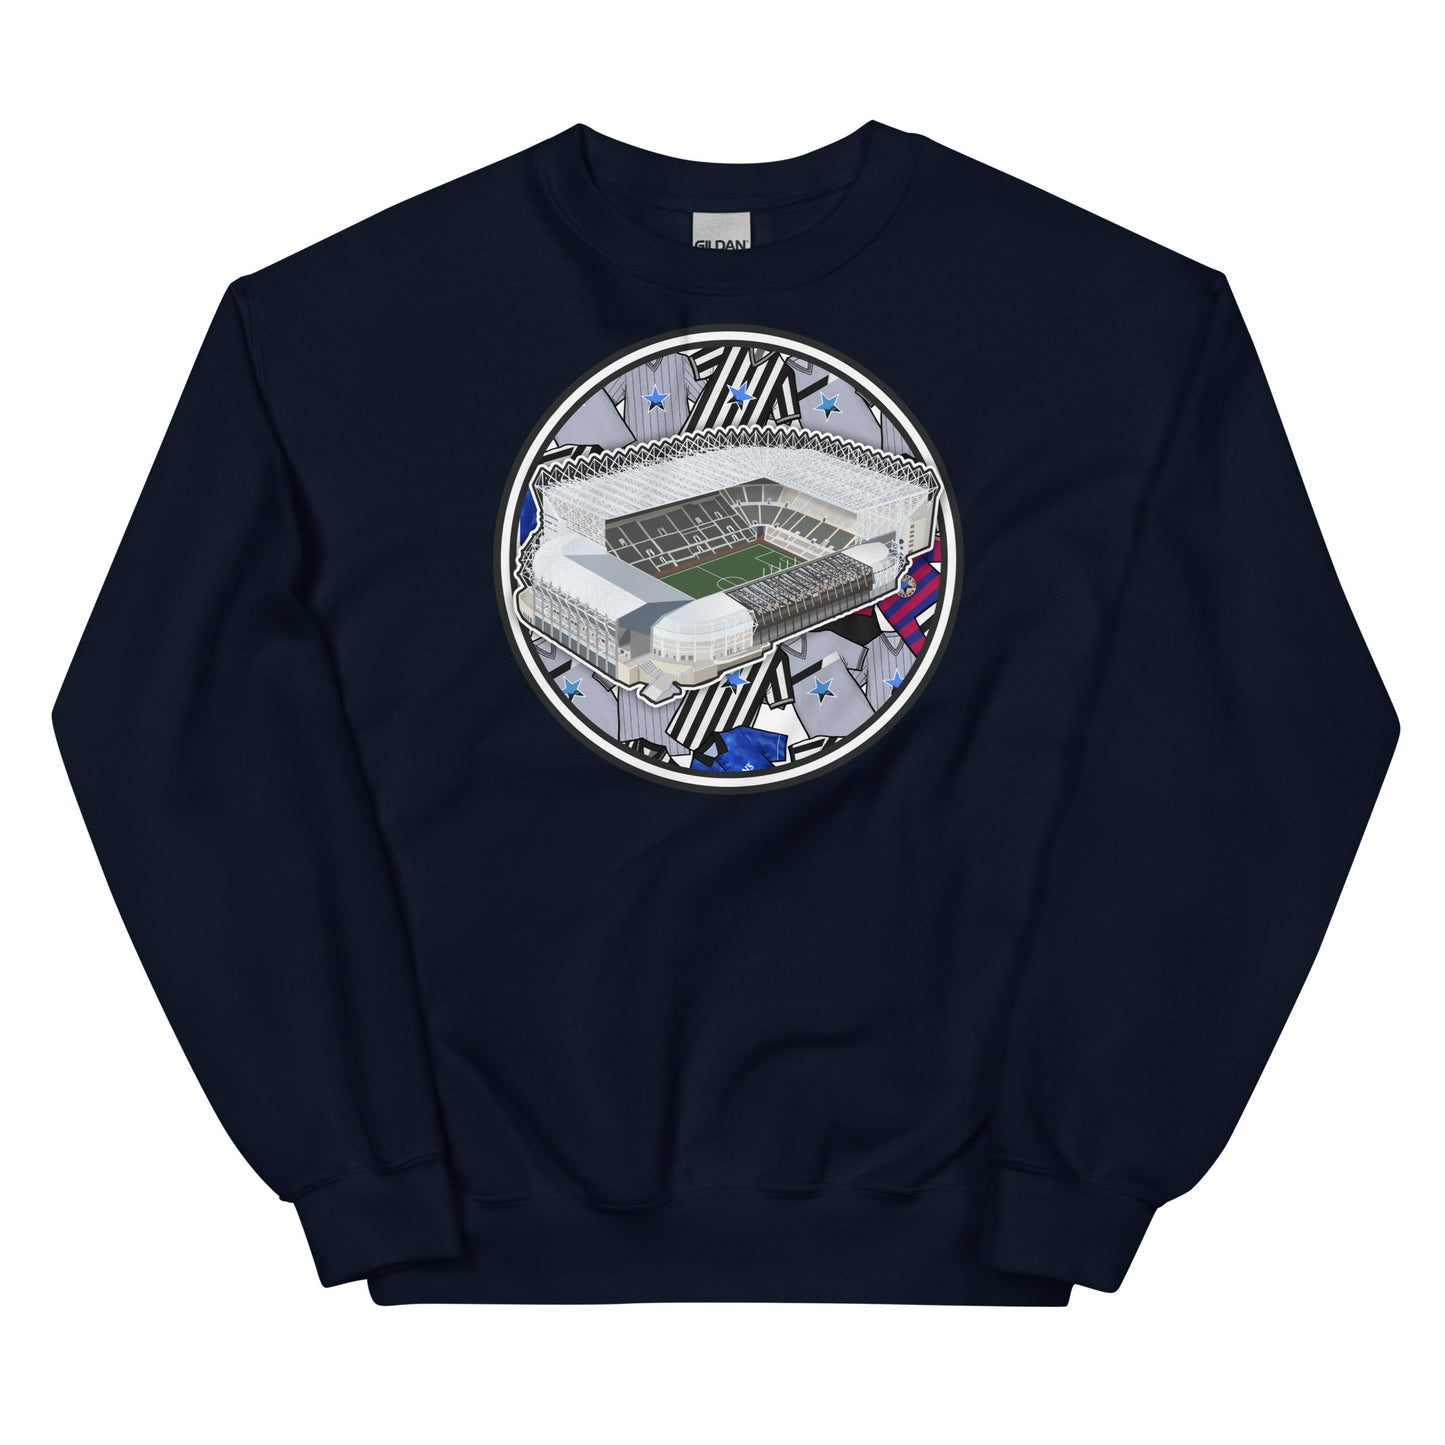 Navy Blue unisex sweatshirt jumper Inspired by the home of Newcastle United, St James' Park in Tyneside.